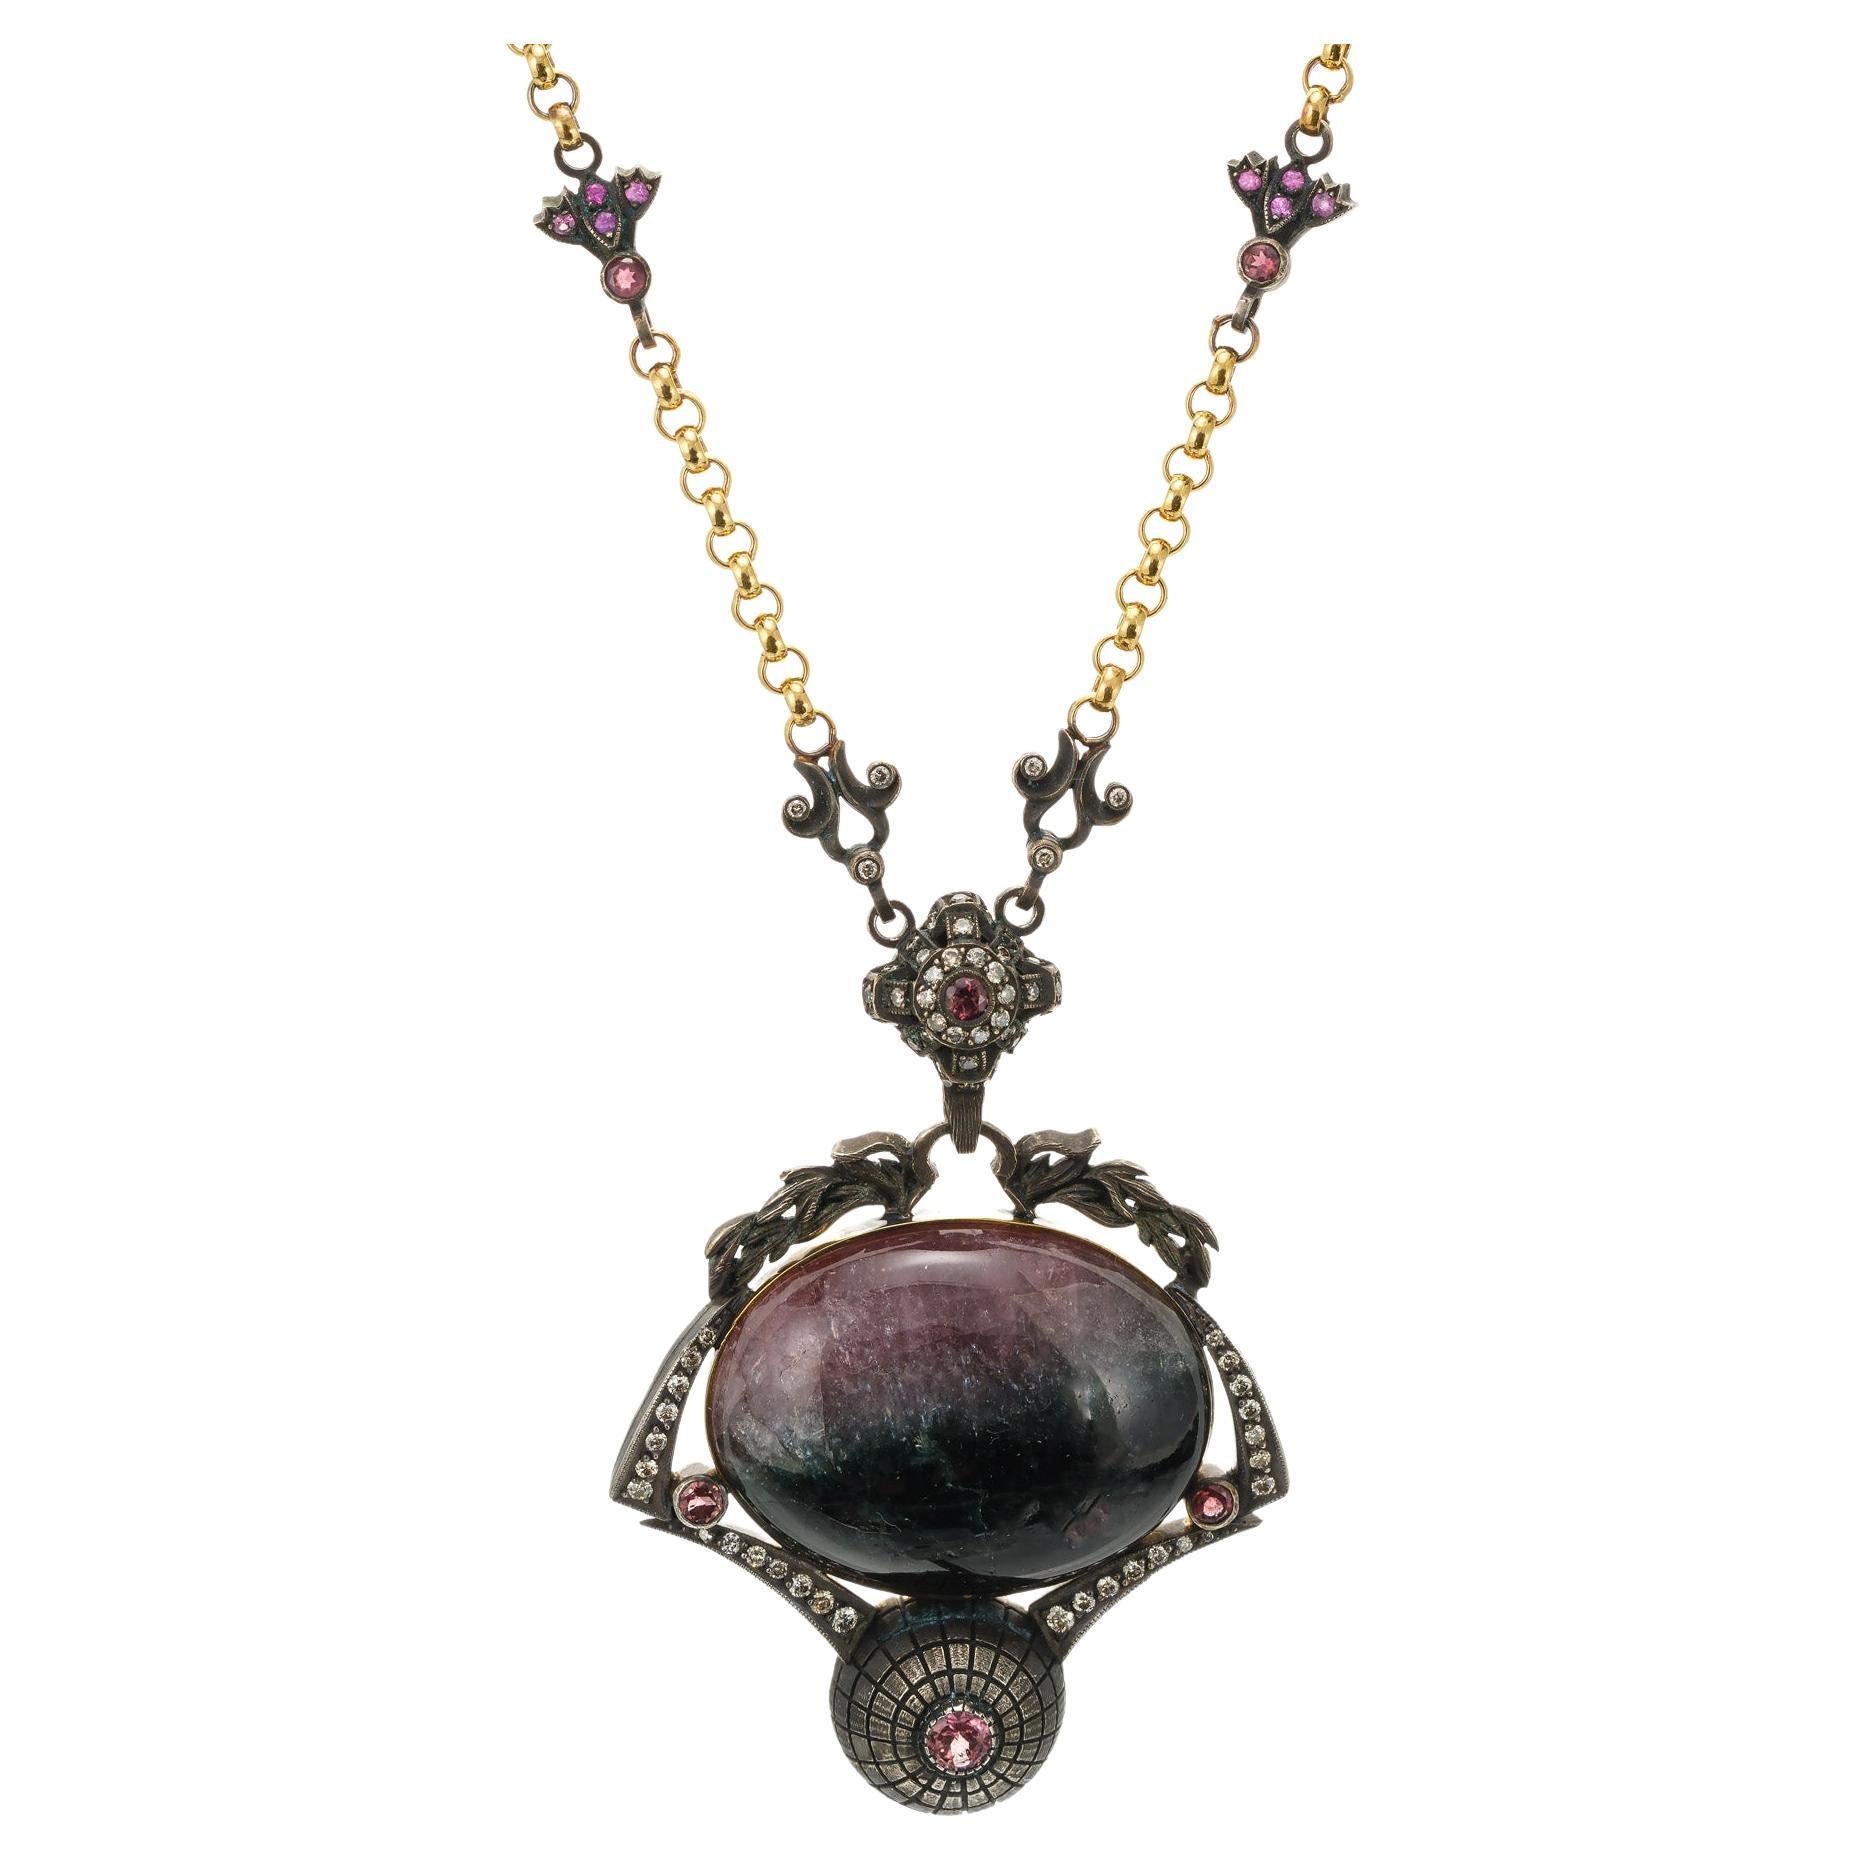 KK Wearable Art Sculpture Byzantine style double sided pendant necklace. Pink, black and white 35.00ct tourmaline accented with 14 pink tourmalines and 65 round diamonds. 18k yellow gold and blackened Sterling silver. Roman Chariot on reverse side